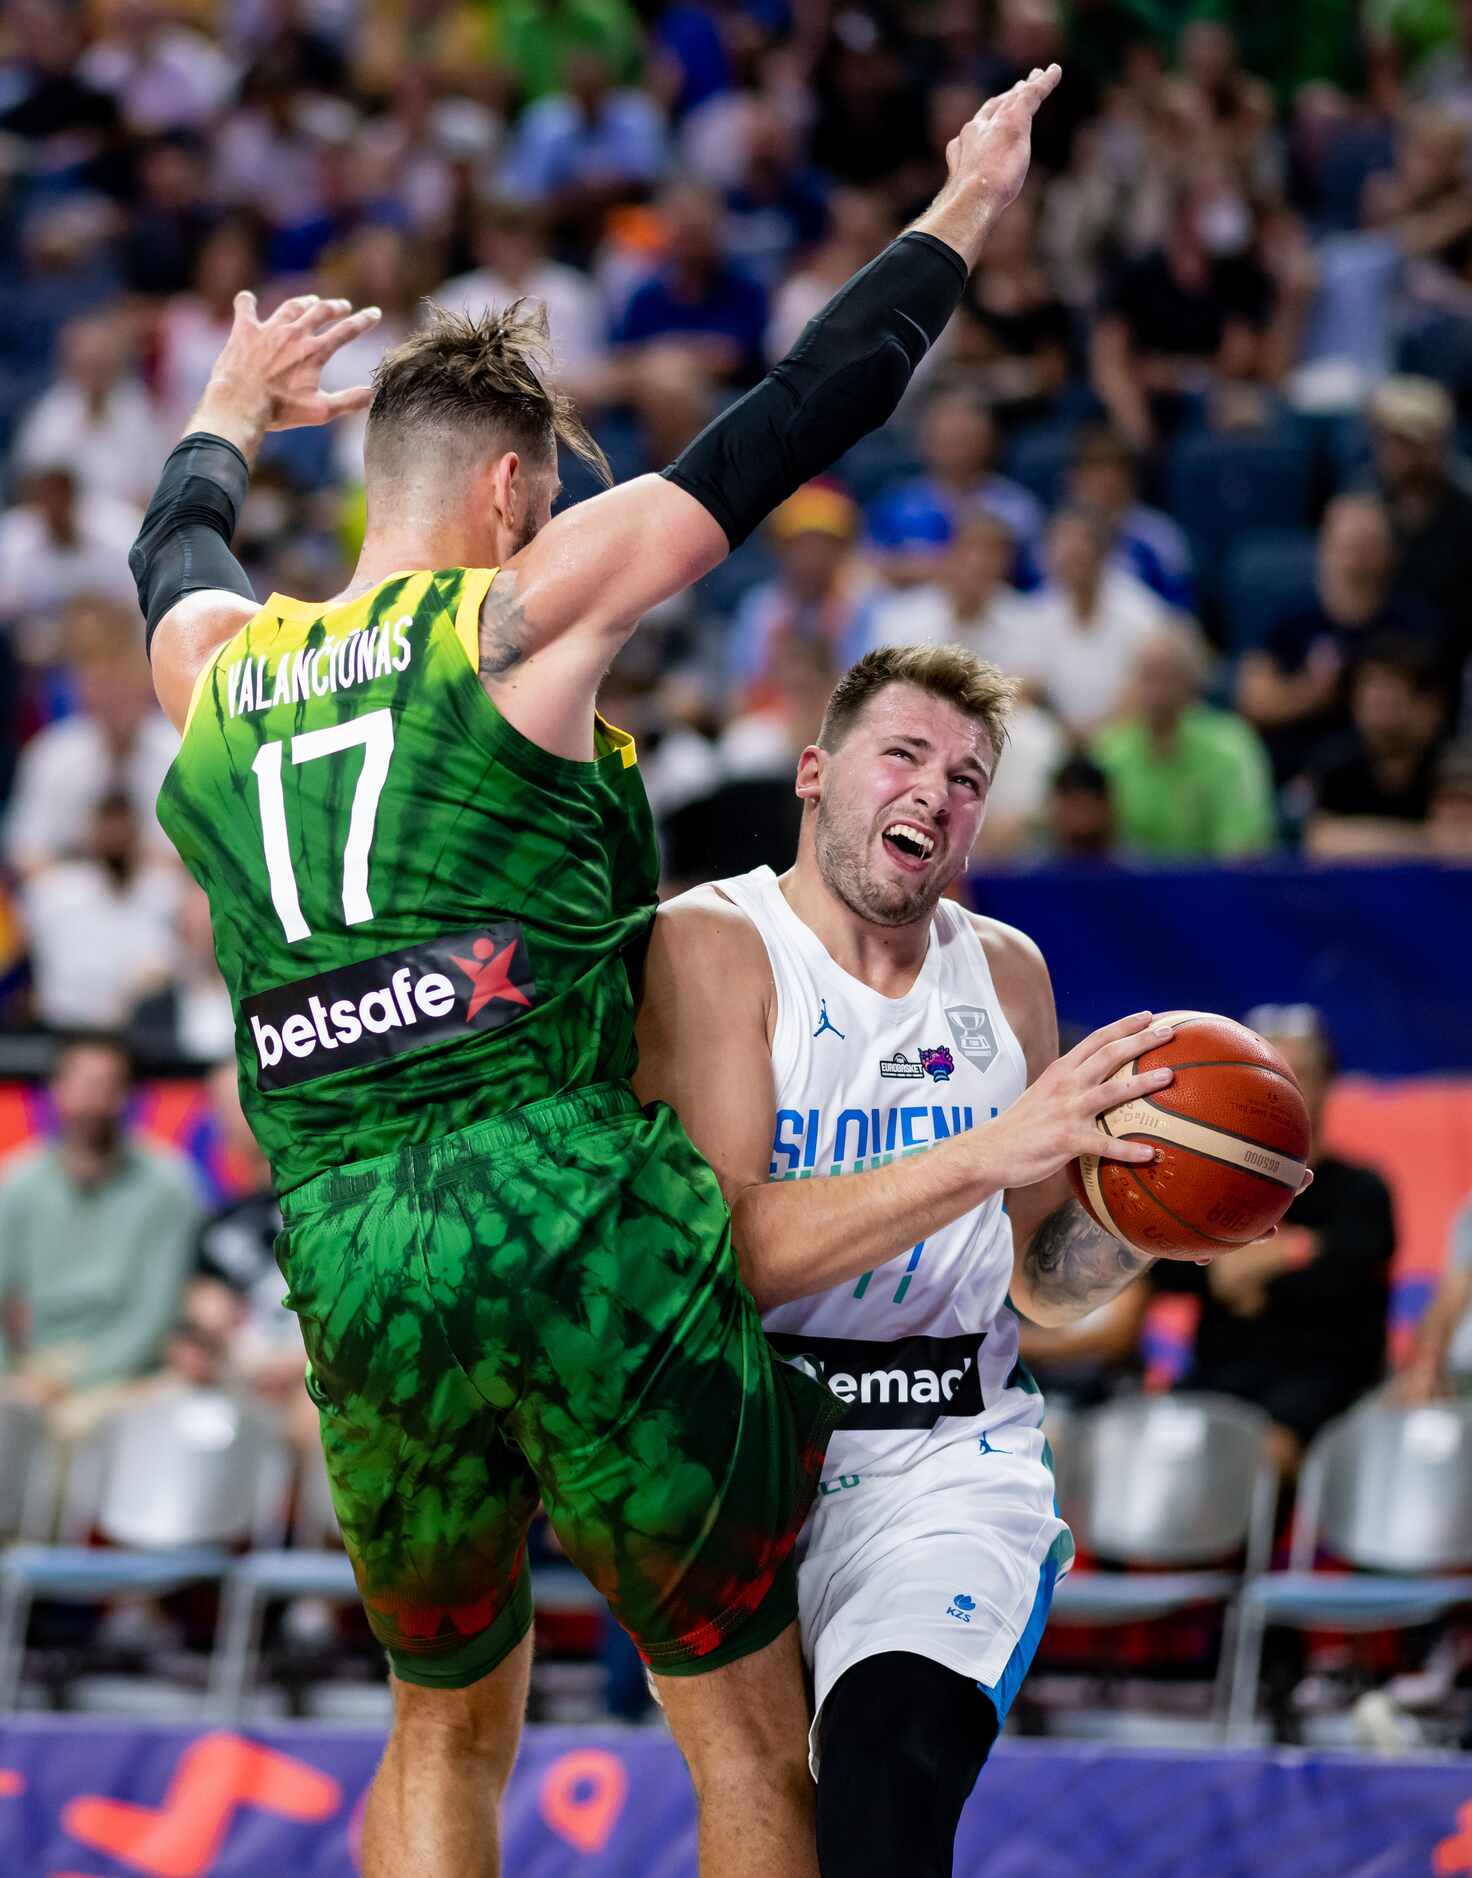 COLOGNE, GERMANY - SEPTEMBER 01: Luka Doncic of Slovenia in action against Jonas Valanciunas...